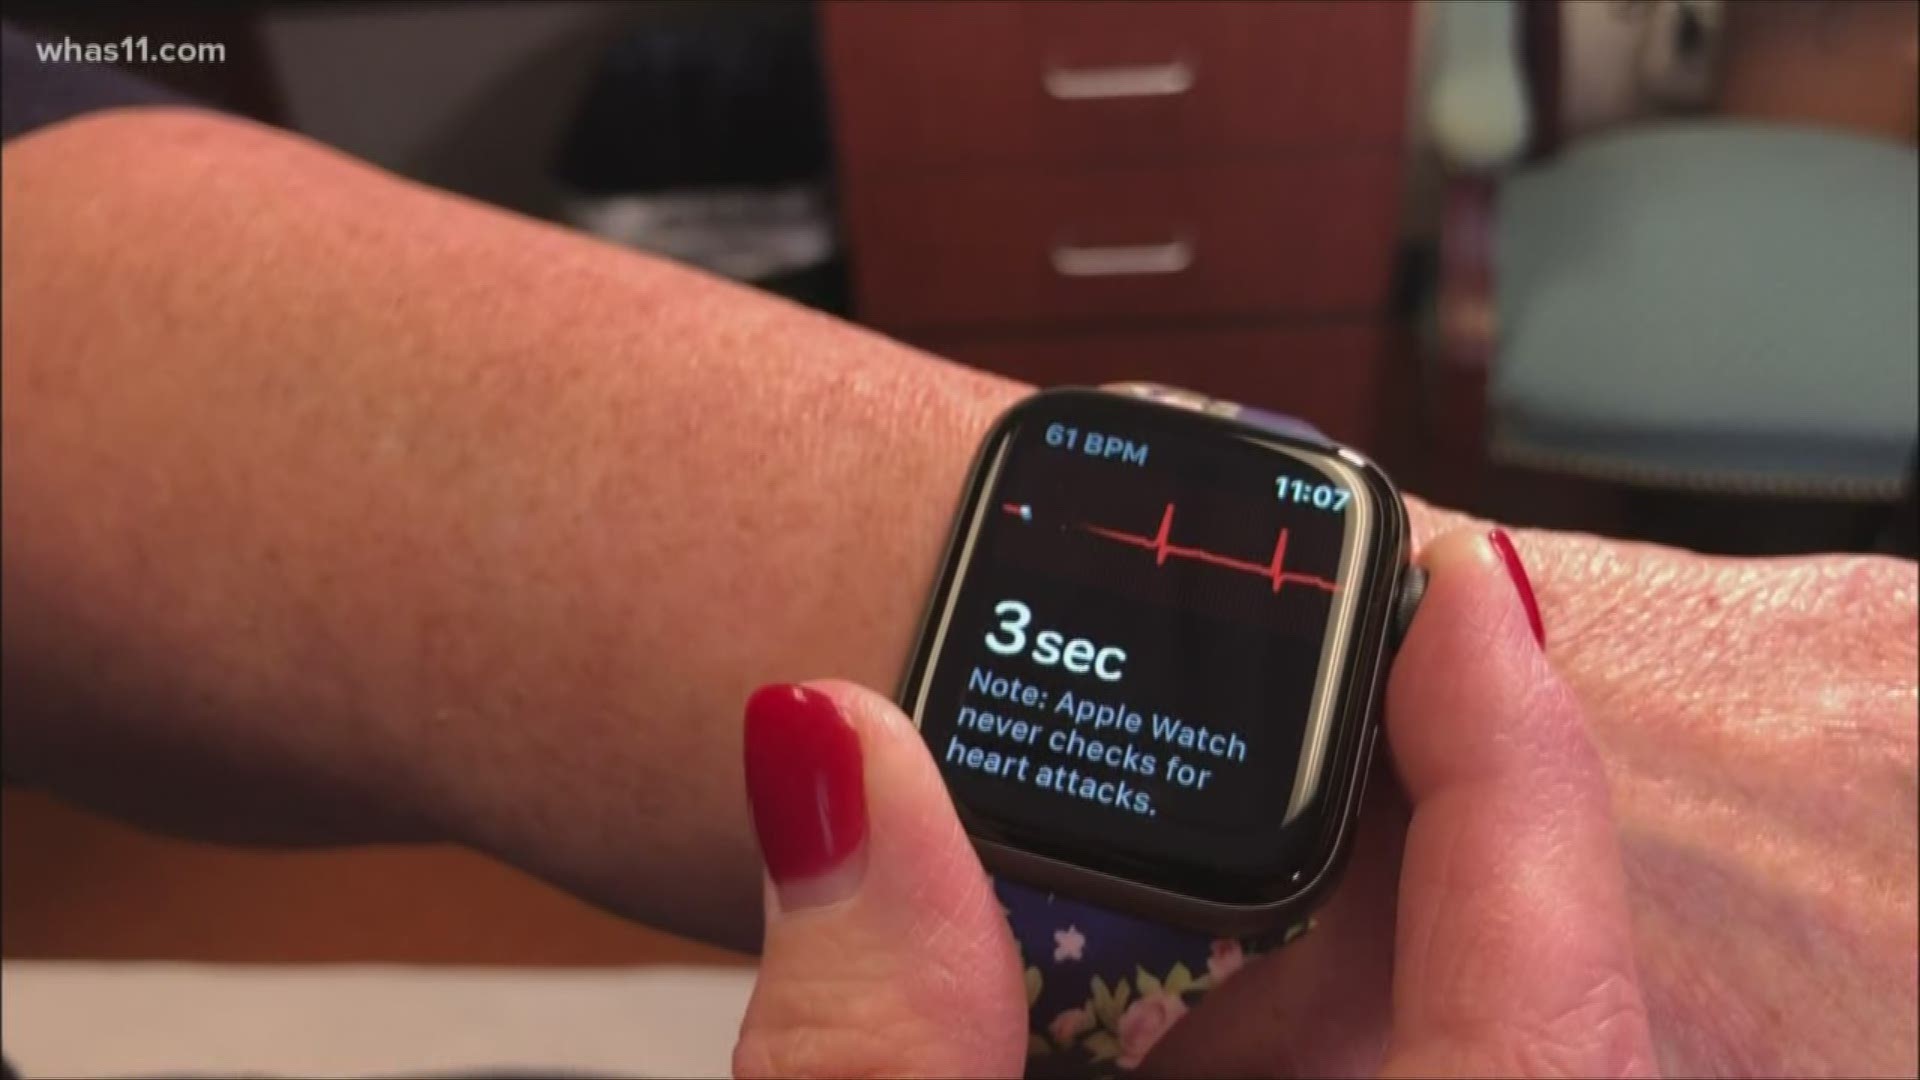 Rosemary Stiles wanted an Apple watch so she could keep in touch with her kids on the go. What she got may have saved her life.